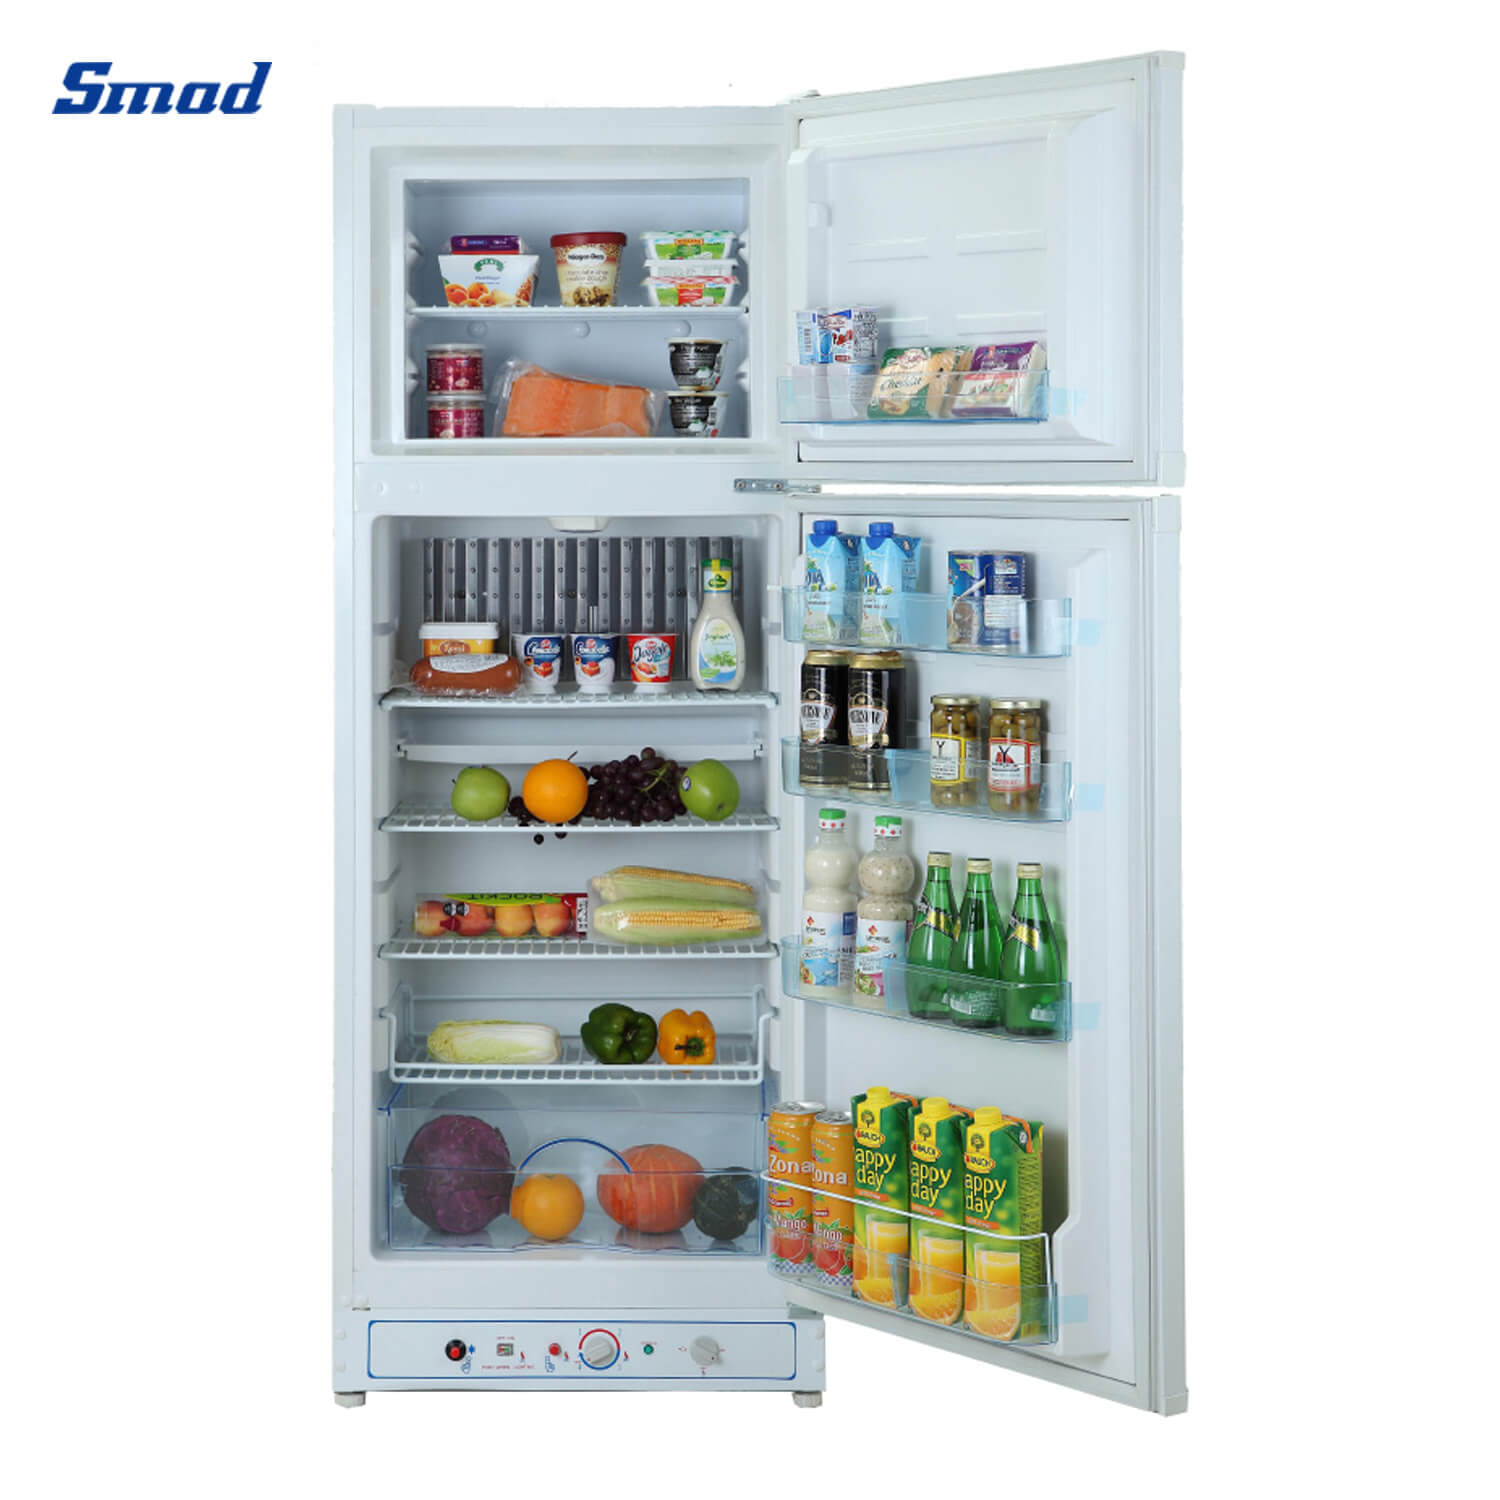 Smad 7.9 Cu. Ft. Double Door Natural Gas Refrigerator with Elegant Structure Design